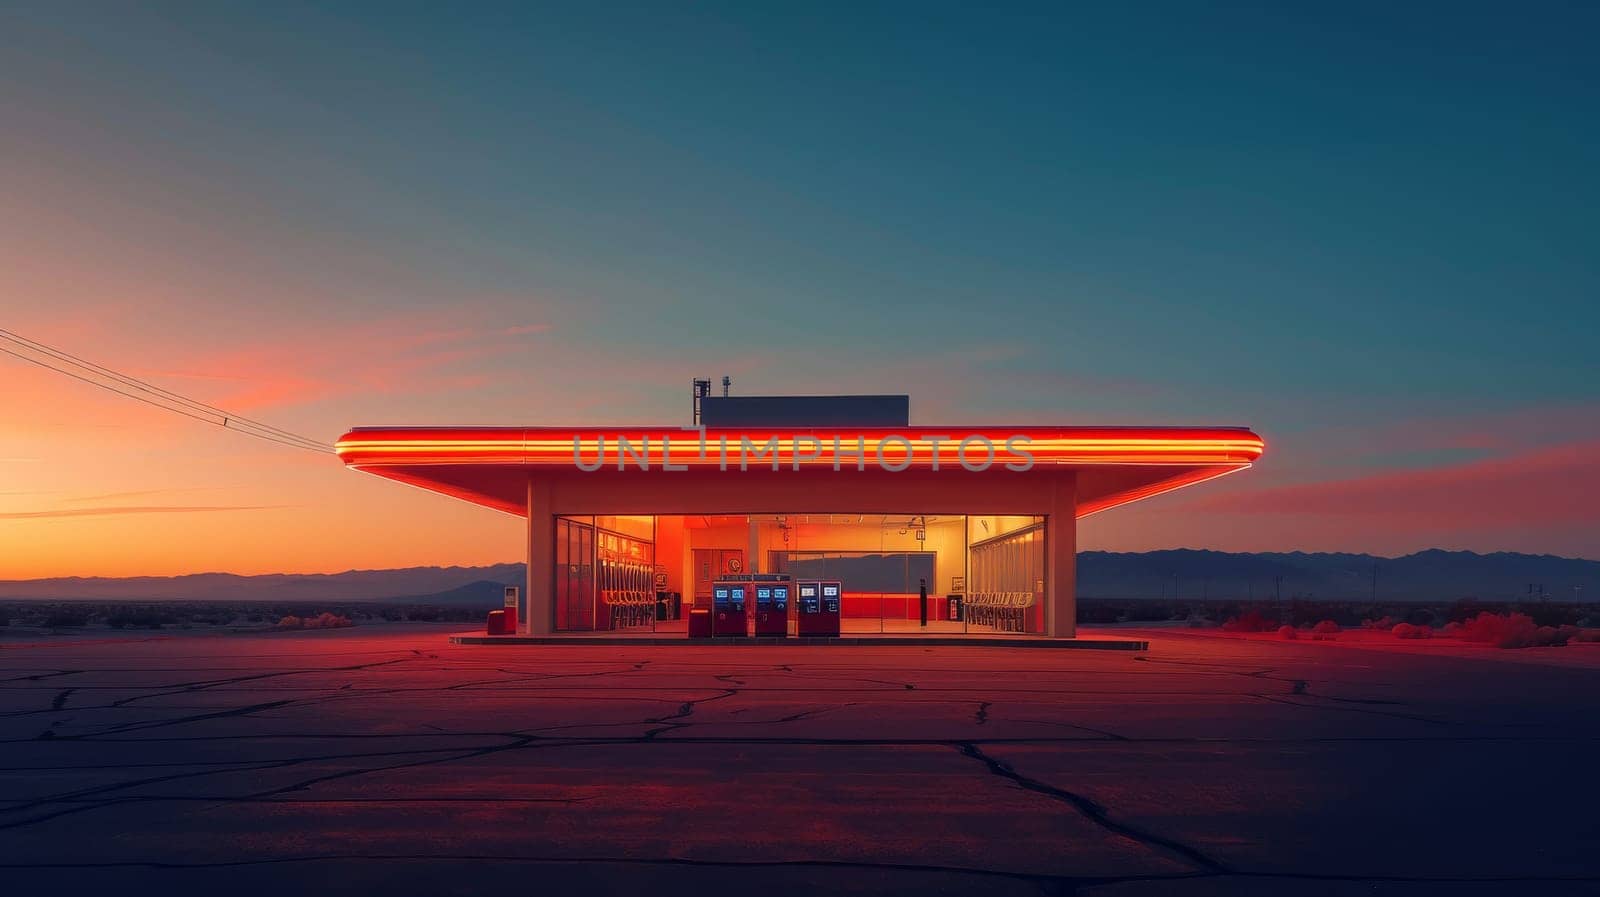 A gas station with a red roof and neon lights. The sky is orange and the sun is setting